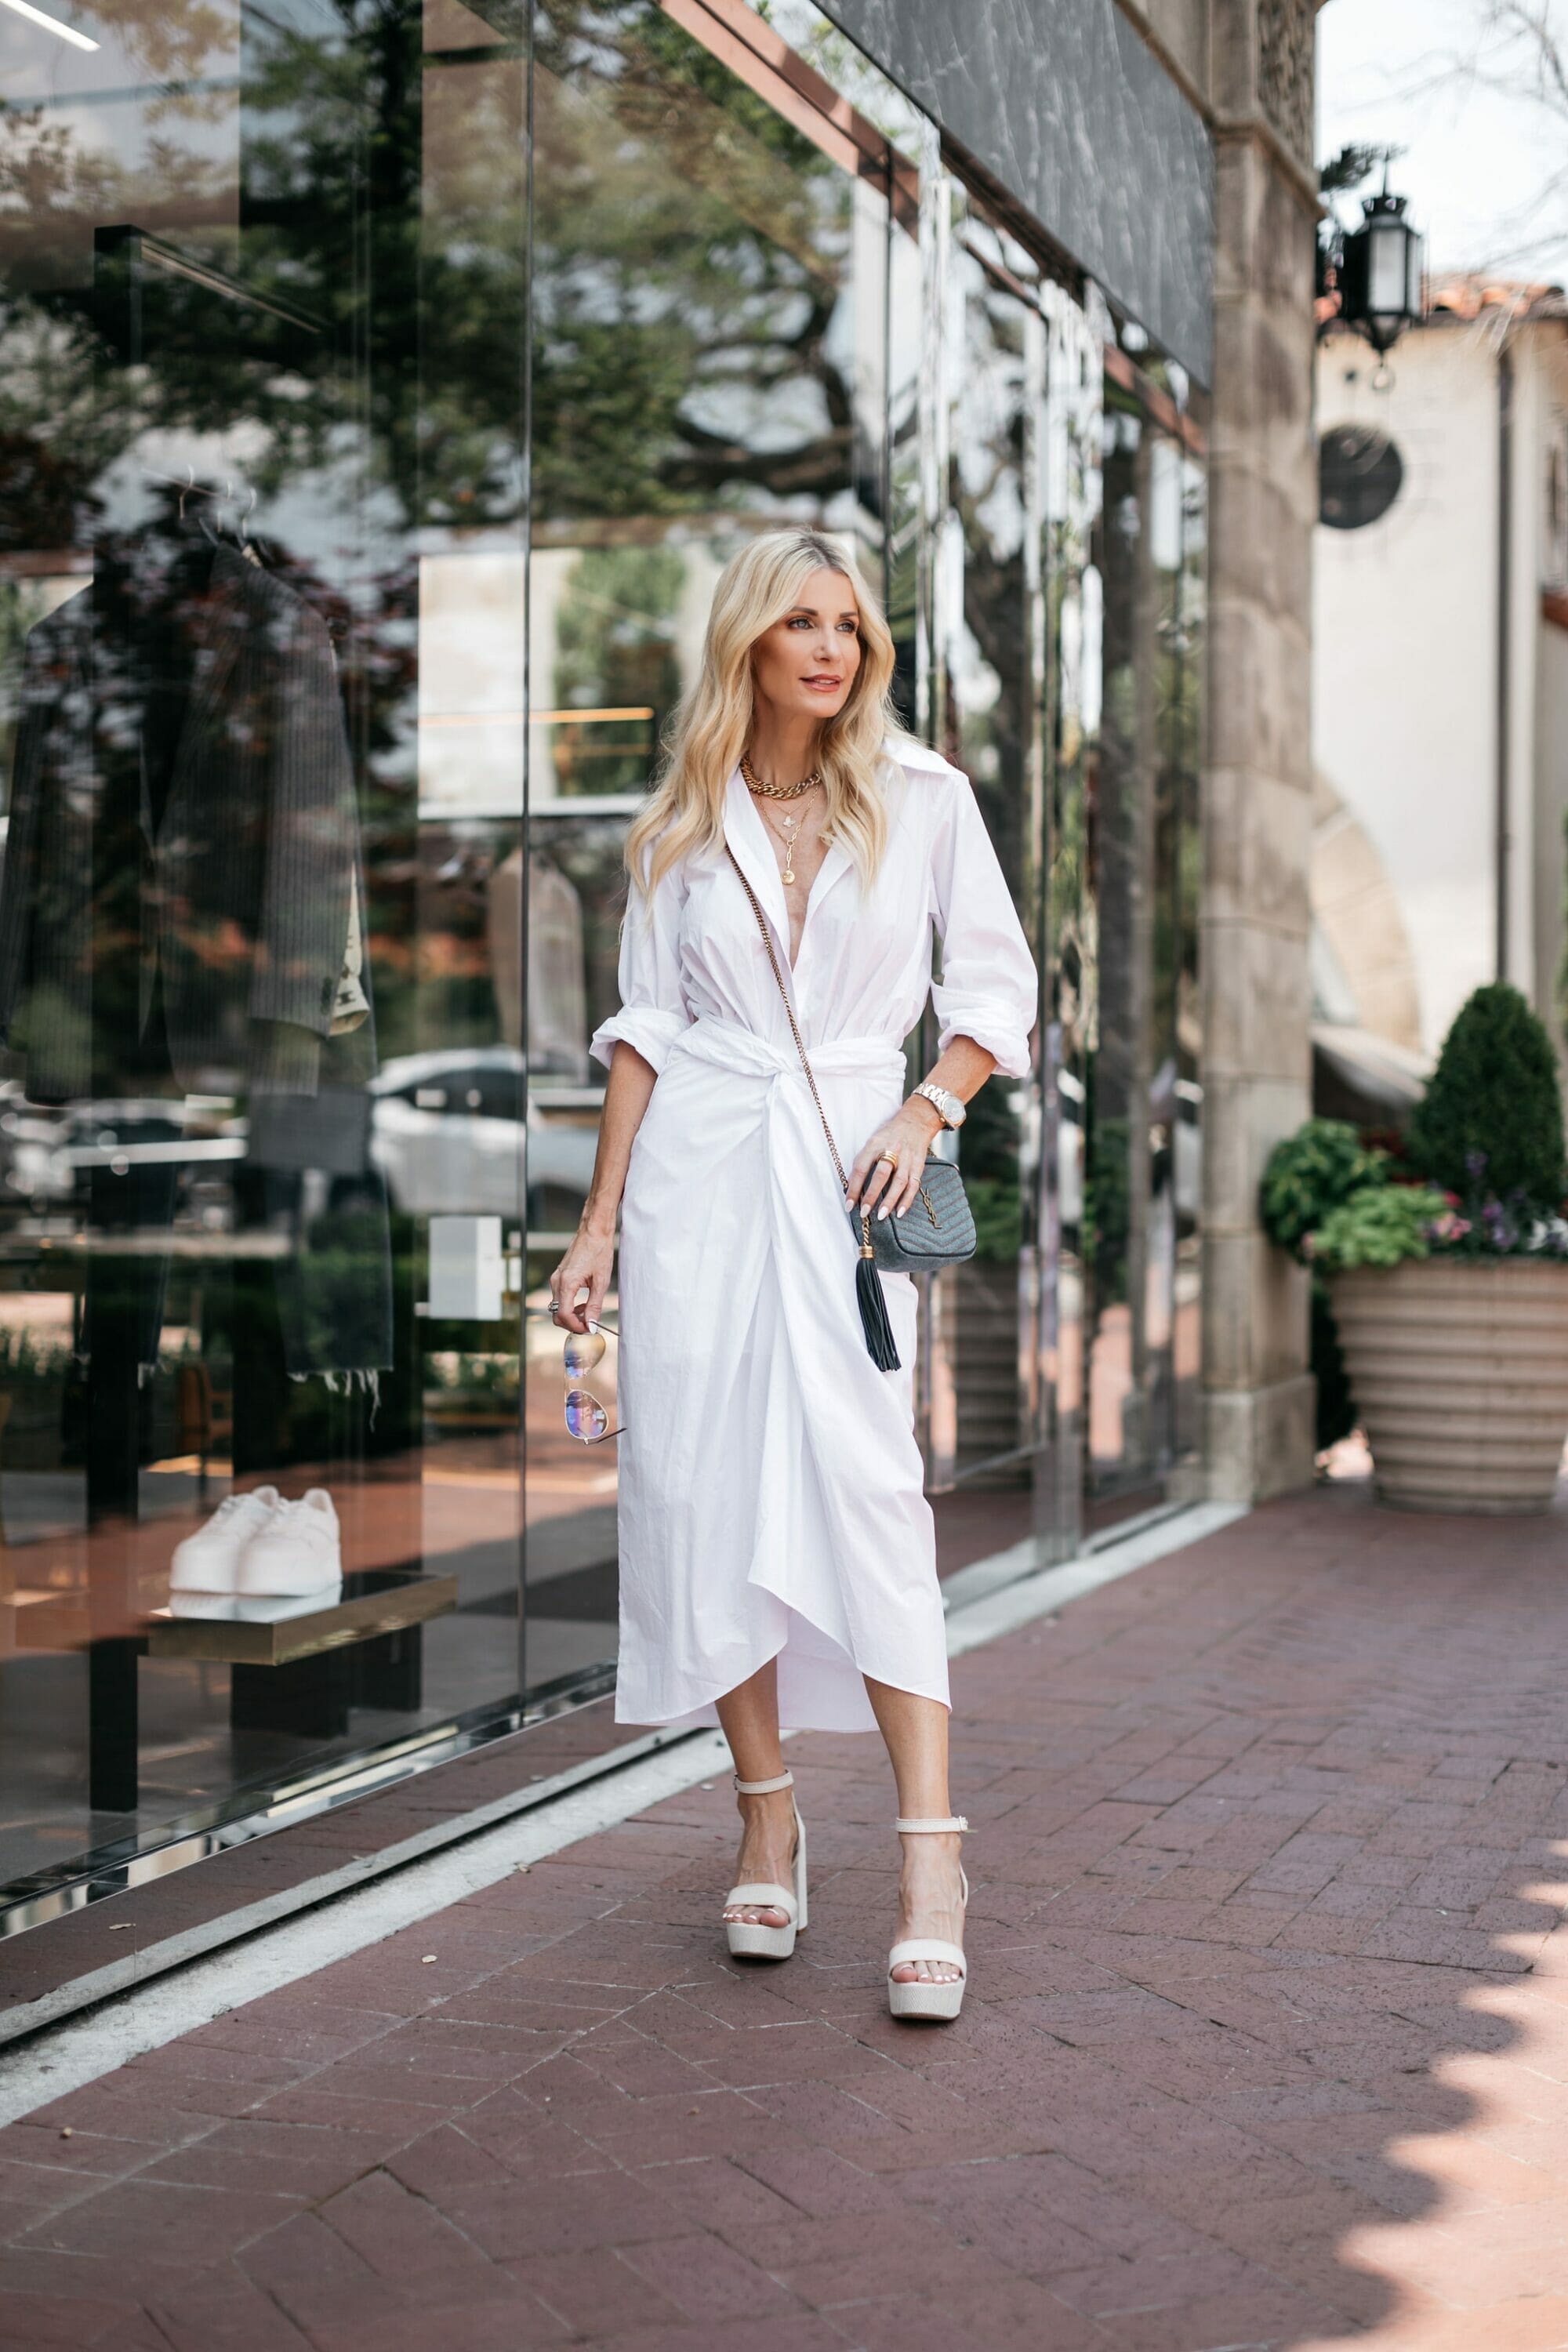 Over 40 fashion blogger wearing a white dress tied at the waist with white platforms as an example of how to look slimmer in a dress.